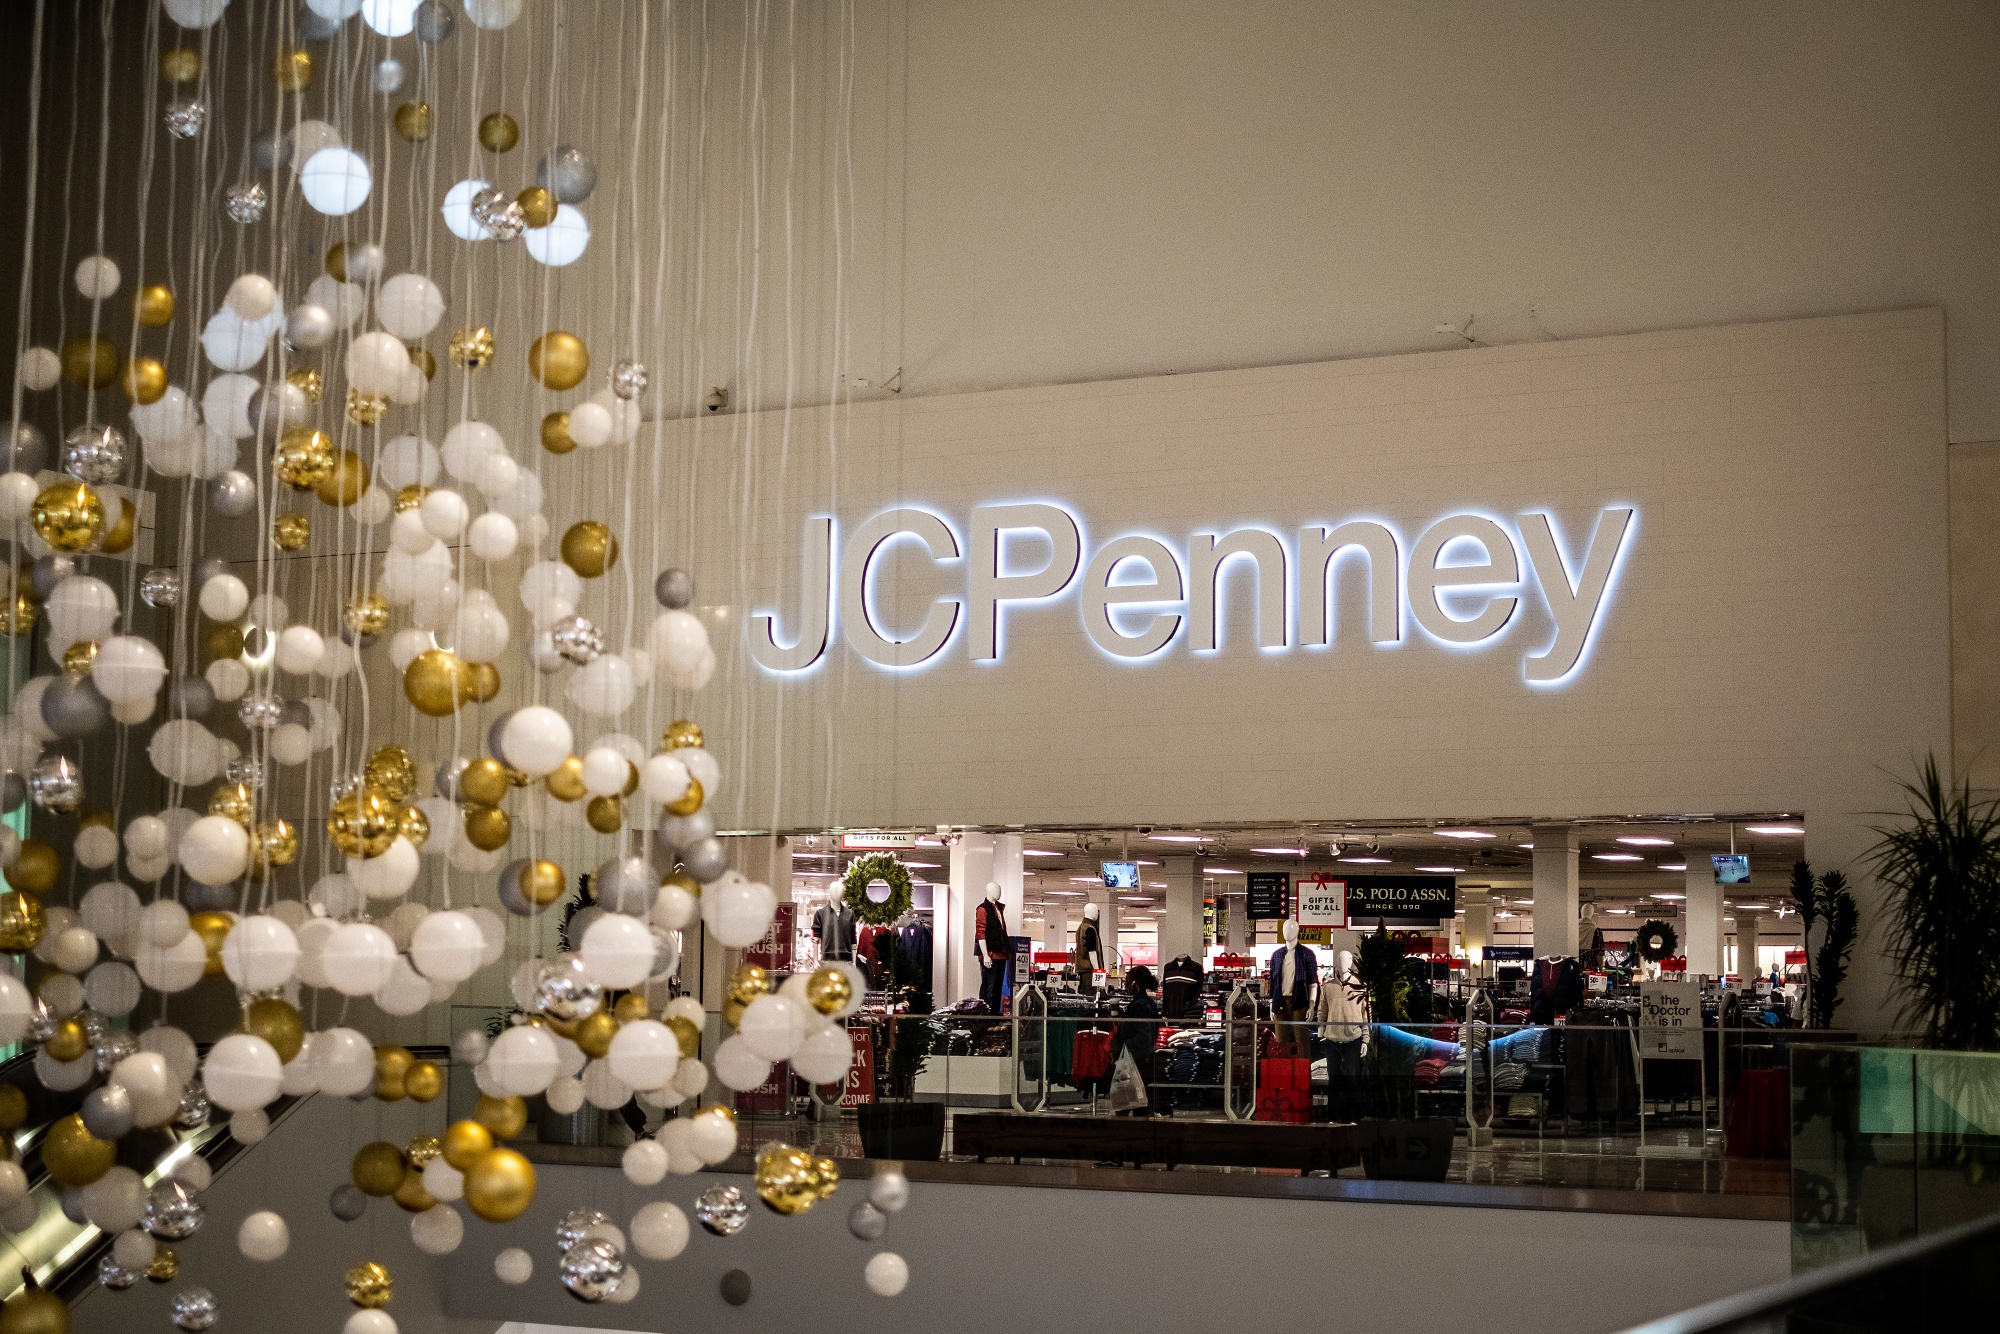 JCPenney coupon giveaway returns after store closings, bankruptcy